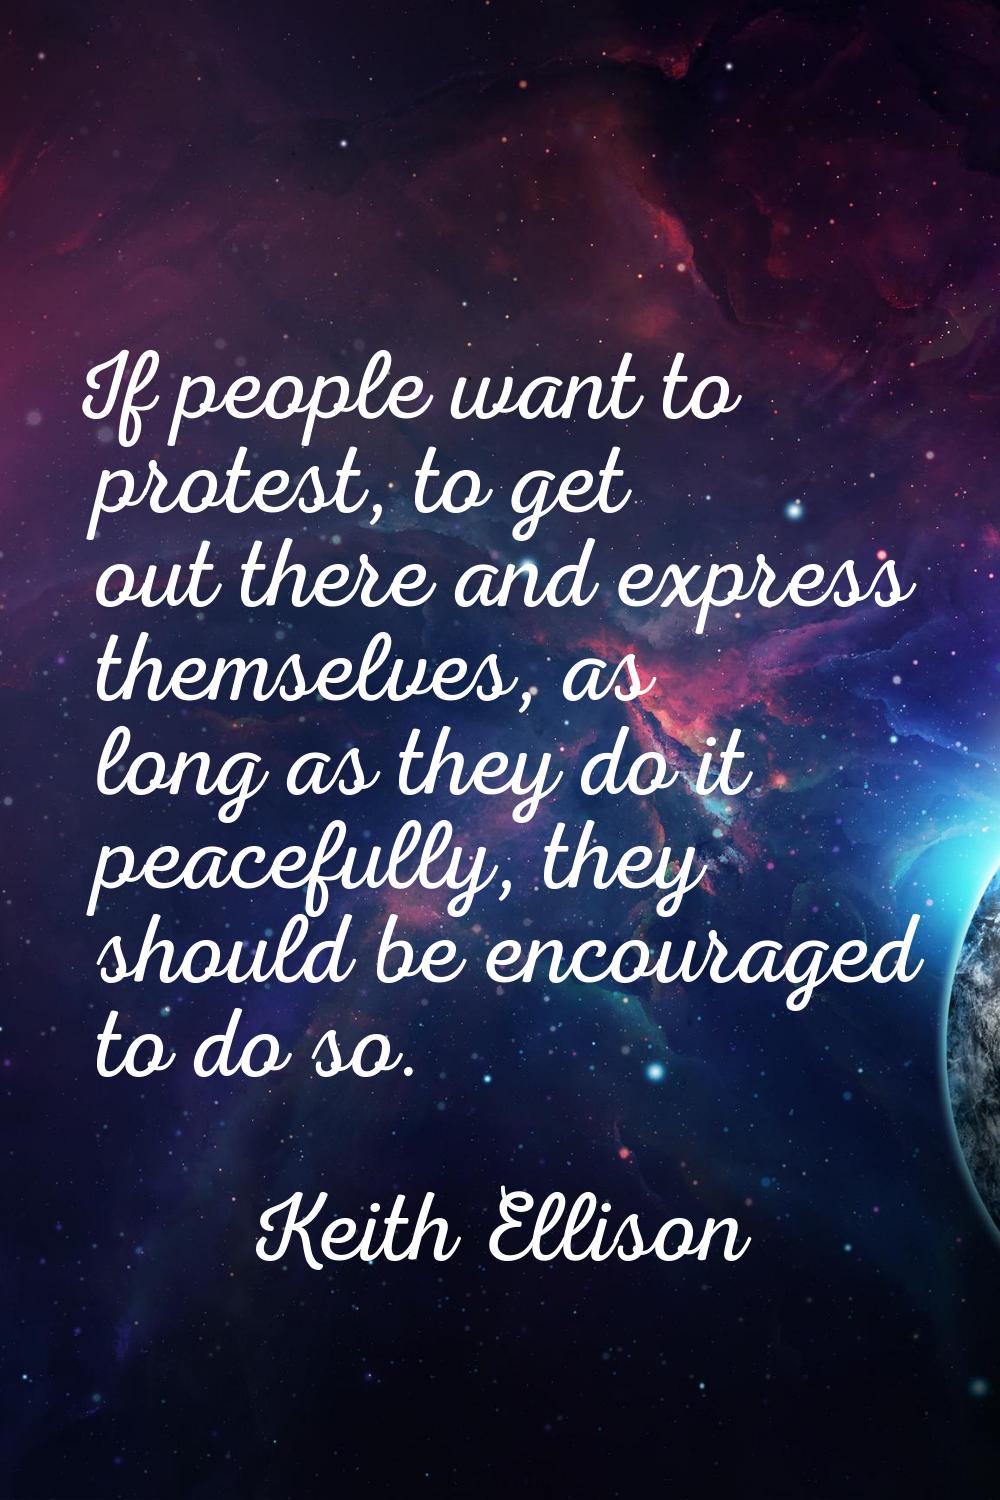 If people want to protest, to get out there and express themselves, as long as they do it peacefull